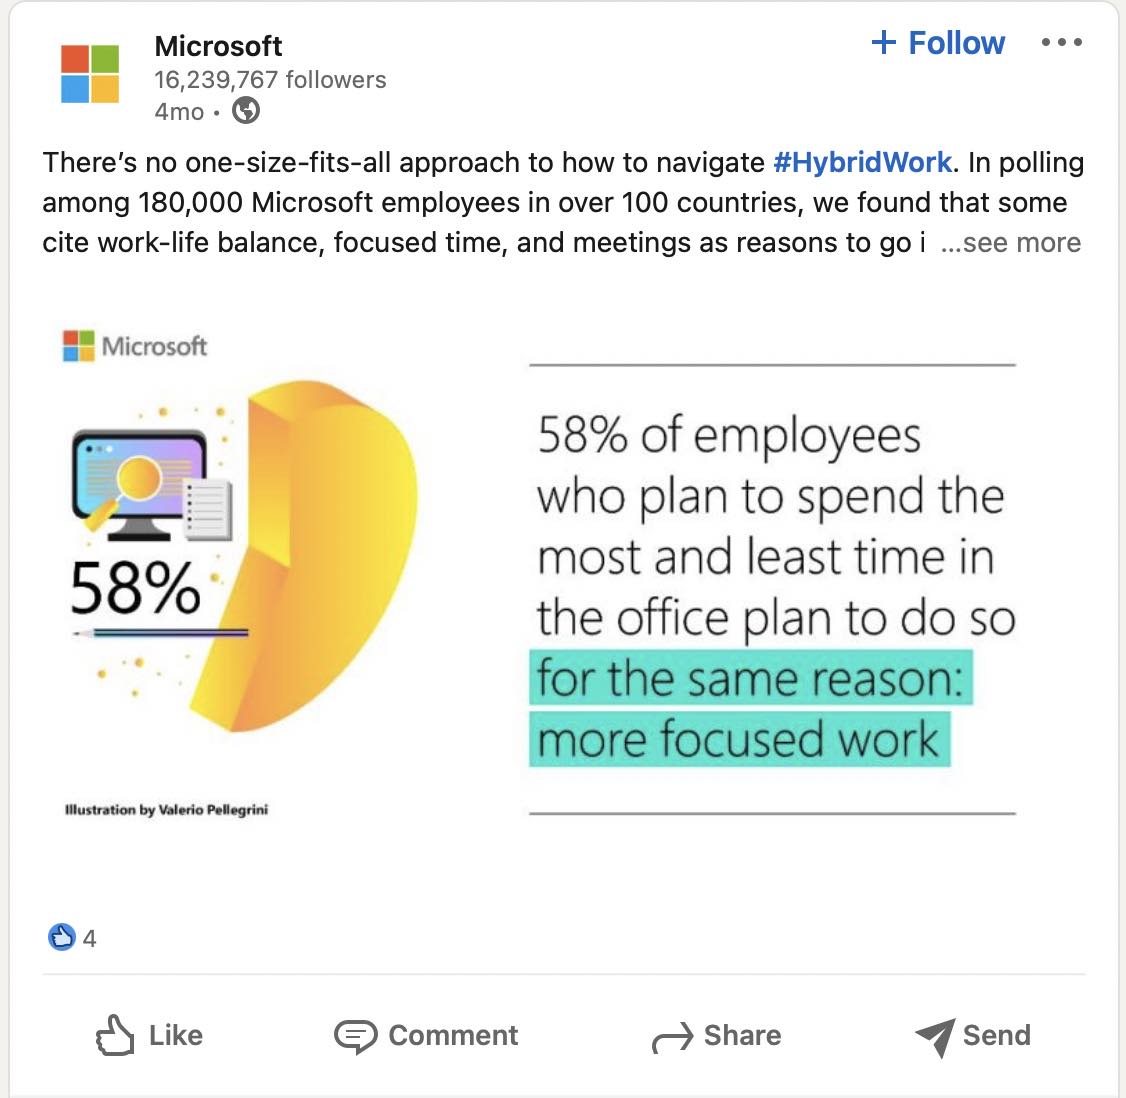 Screenshot of a post on Microsoft's LinkedIn page with image containing a statistic from an employee survey